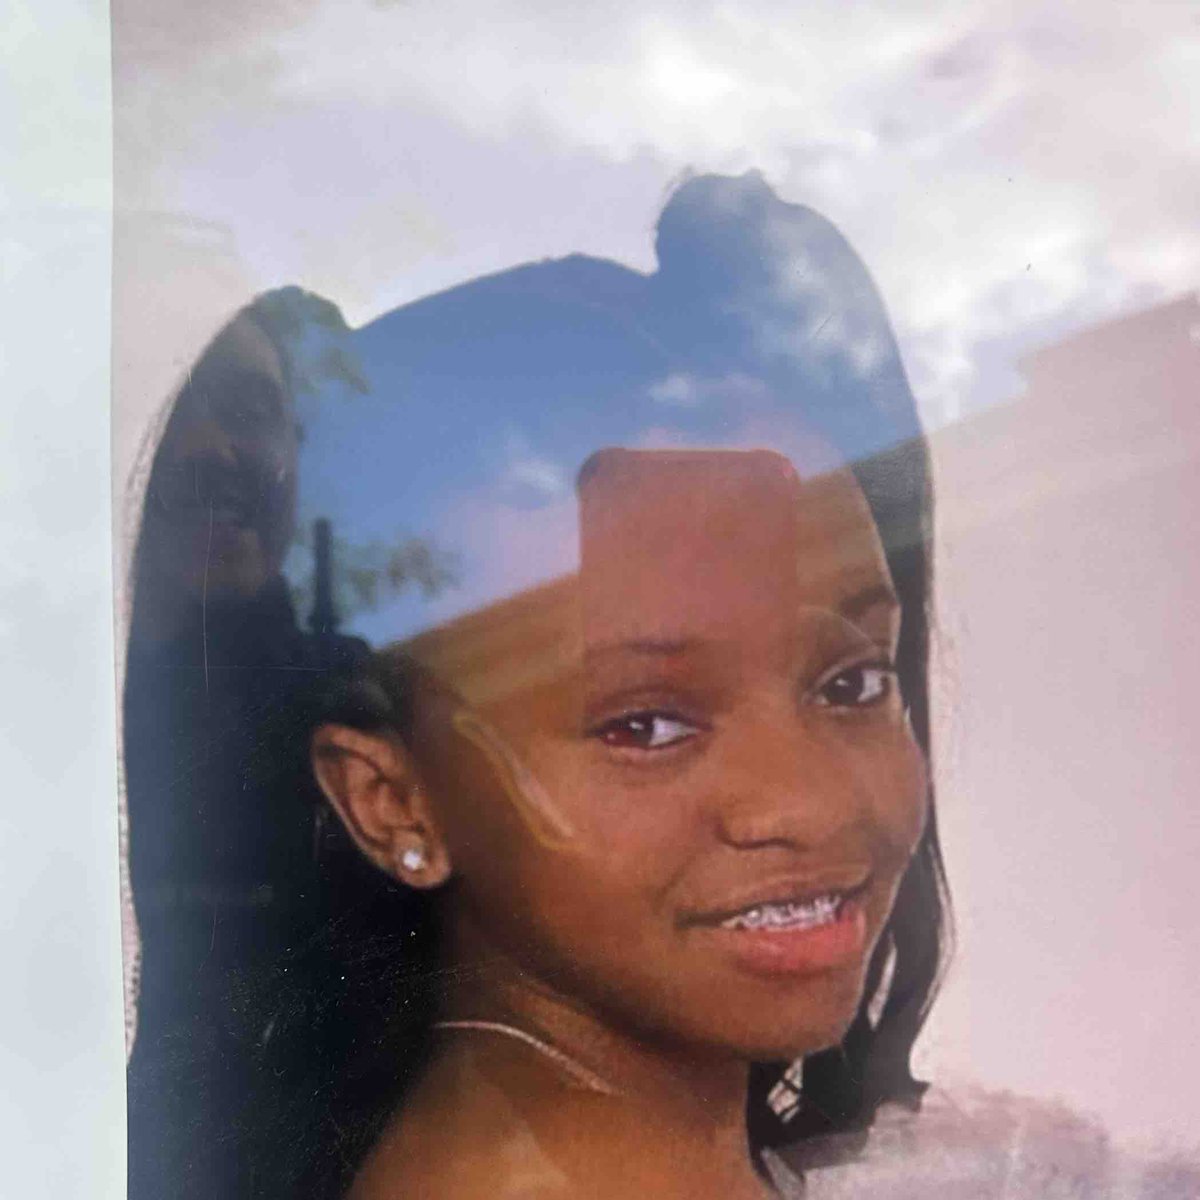 #CriticalMissing 14-year-old Aaliyah Hamm (5’1 100lbs). Last seen in the Essex area wearing a black hooded sweatshirt, blue jeans, black and white Nike shoes, and a blue and pink back pack. Anyone with information is asked to call 911 or 410-307-2020. #HelpLocate #BCoPD